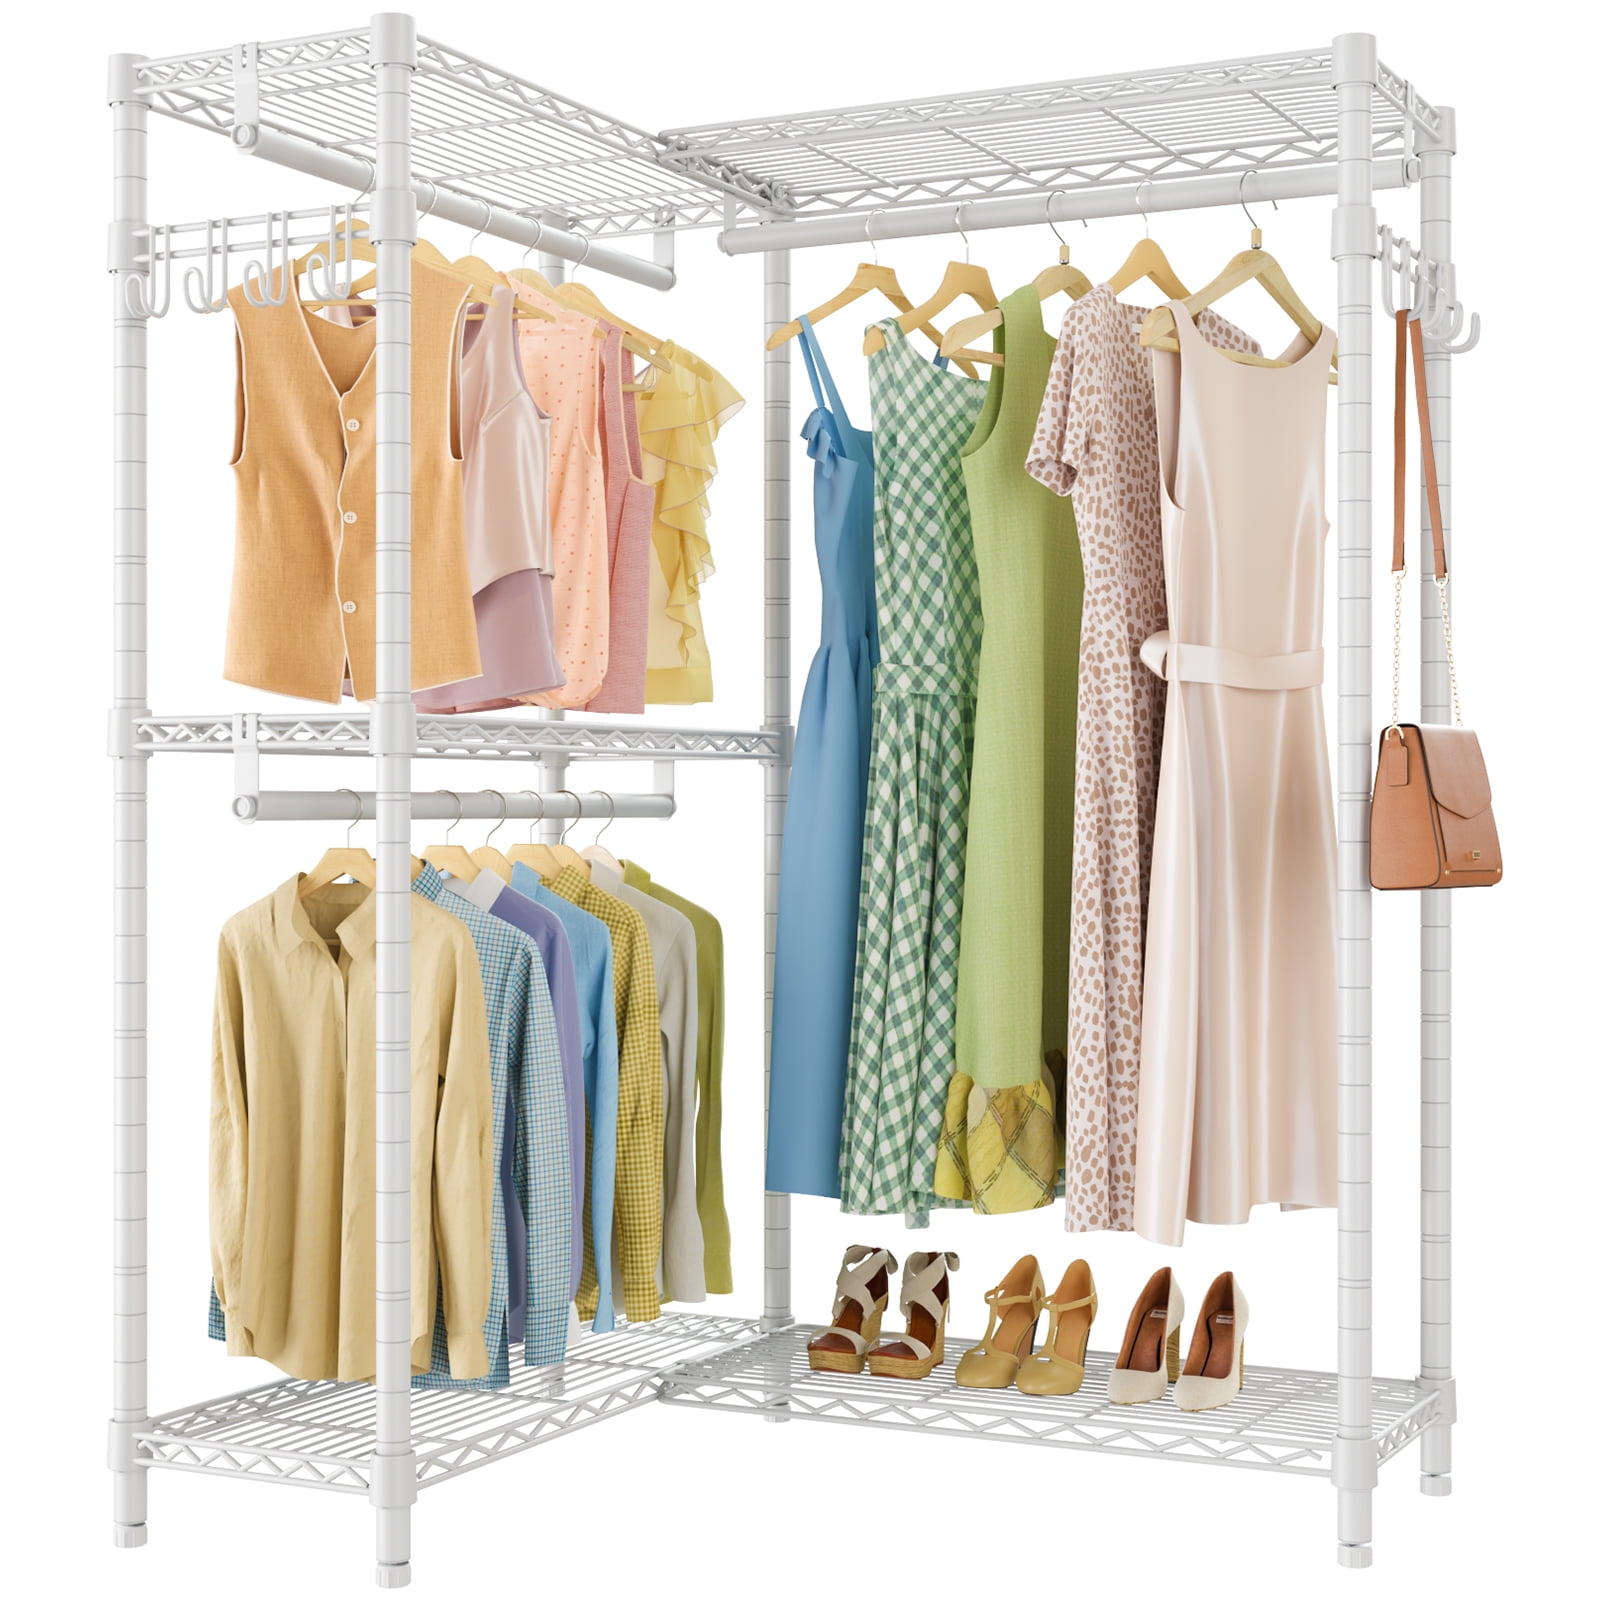 V2E Wire Garment Rack Heavy Duty Clothes Rack with 6-Shelf Hanging